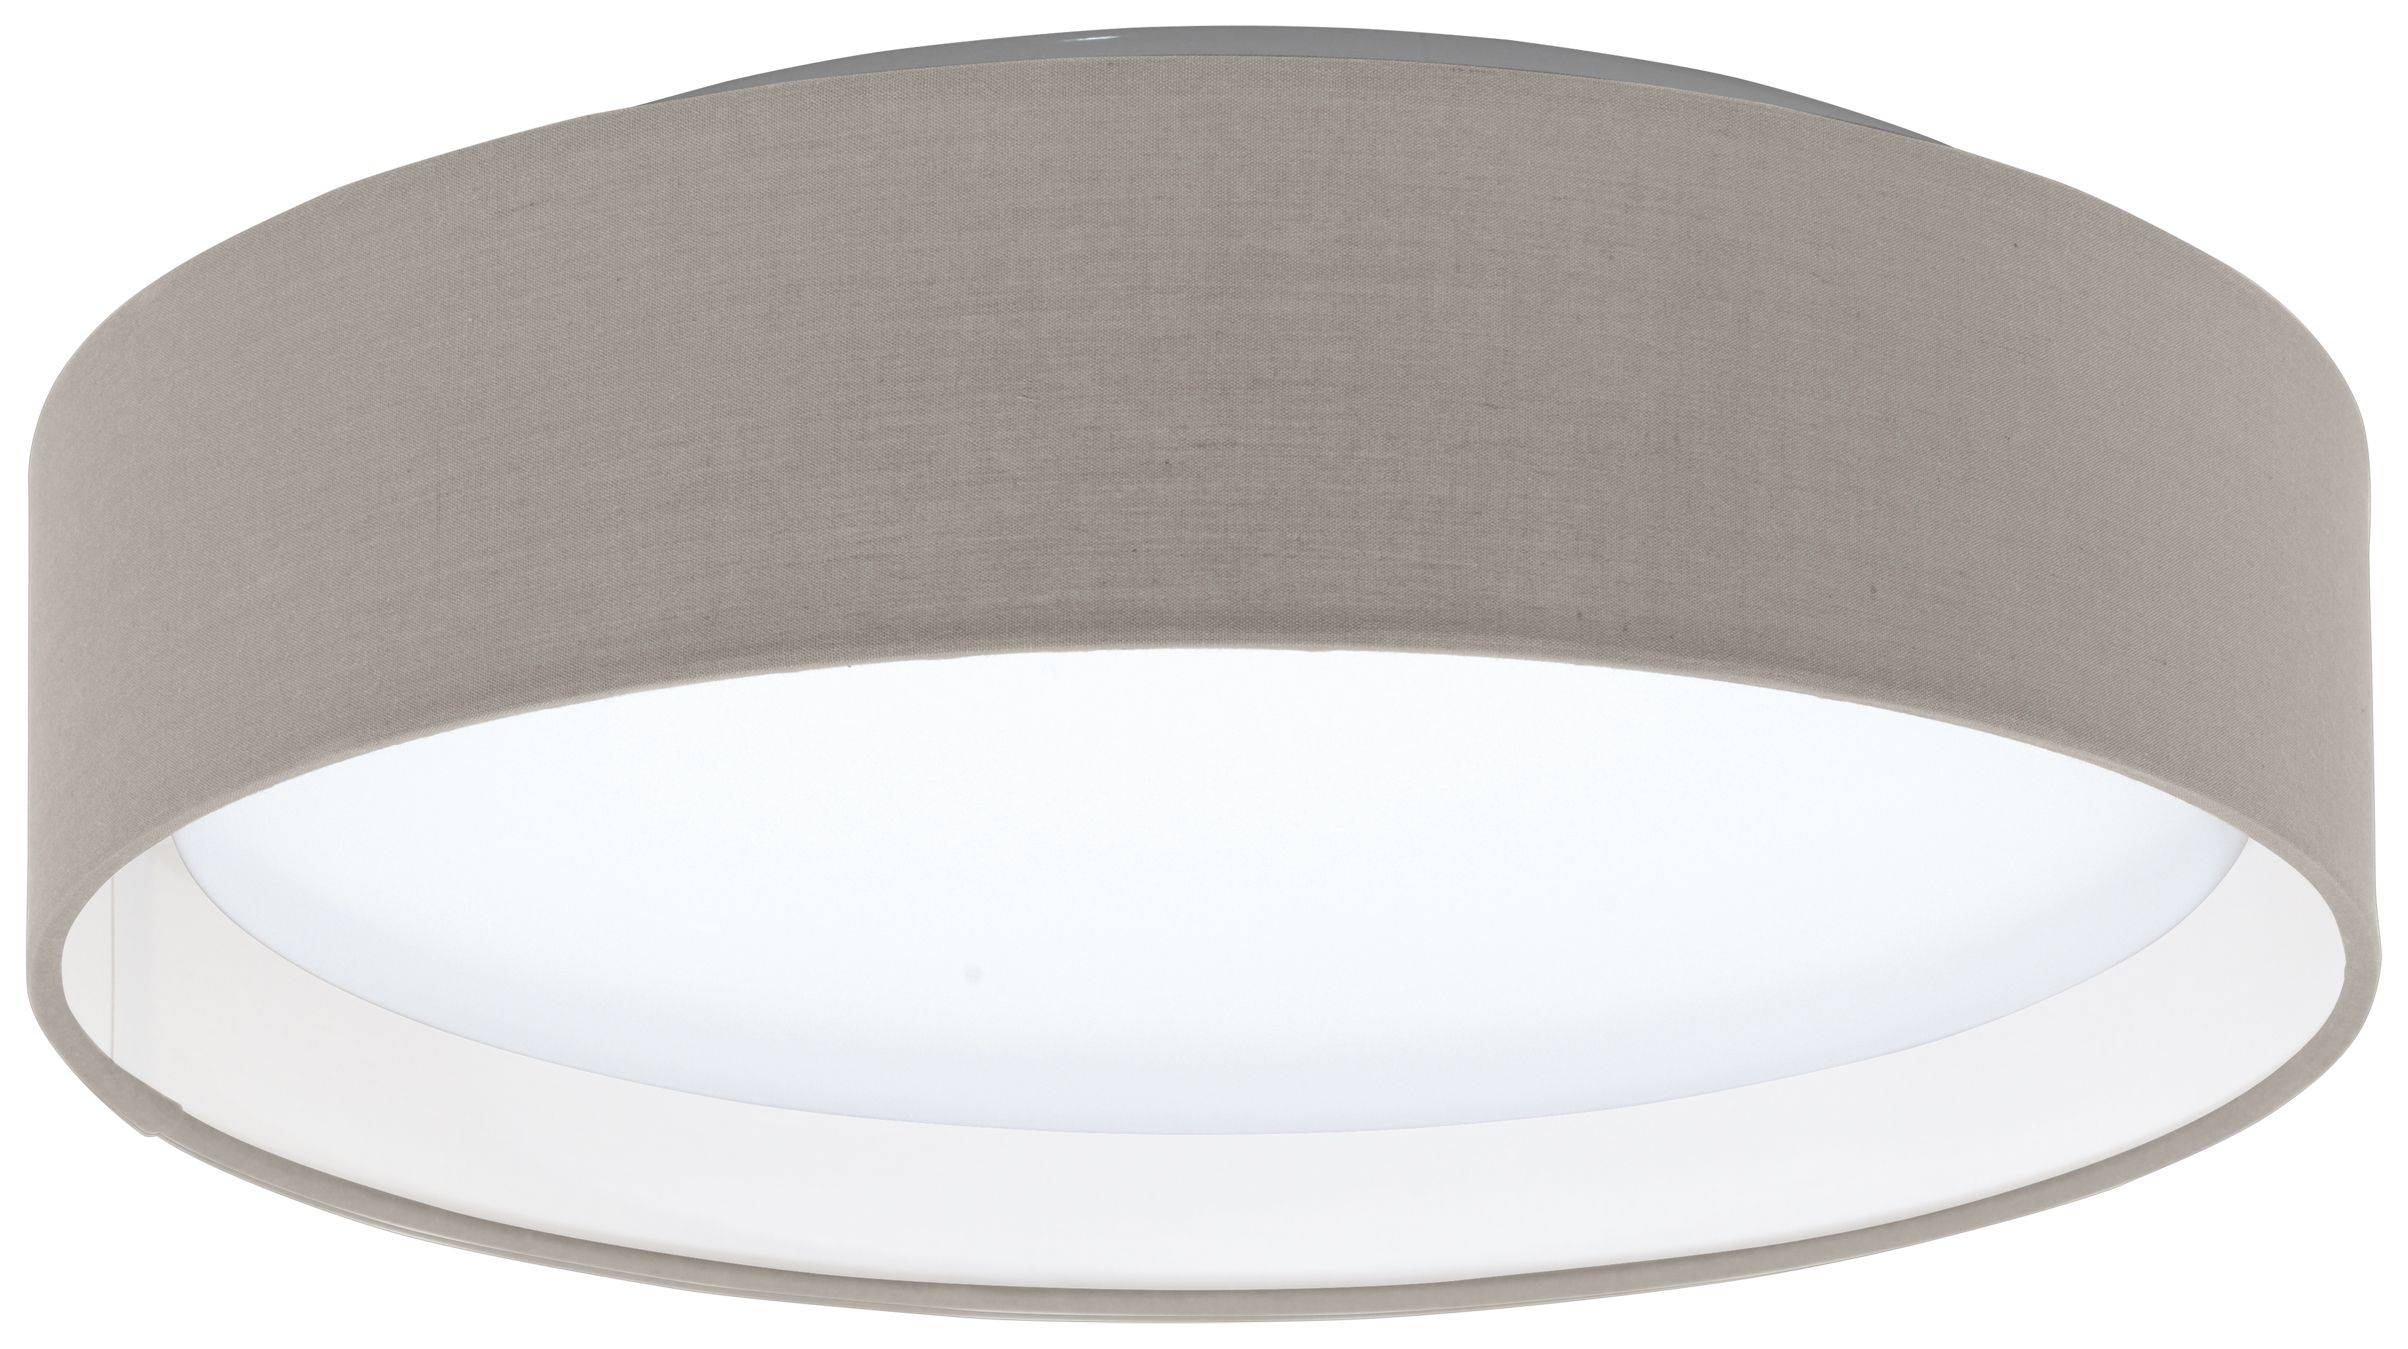 Eglo Pasteri LED Brown/Taupe Ceiling Light - 3.6W